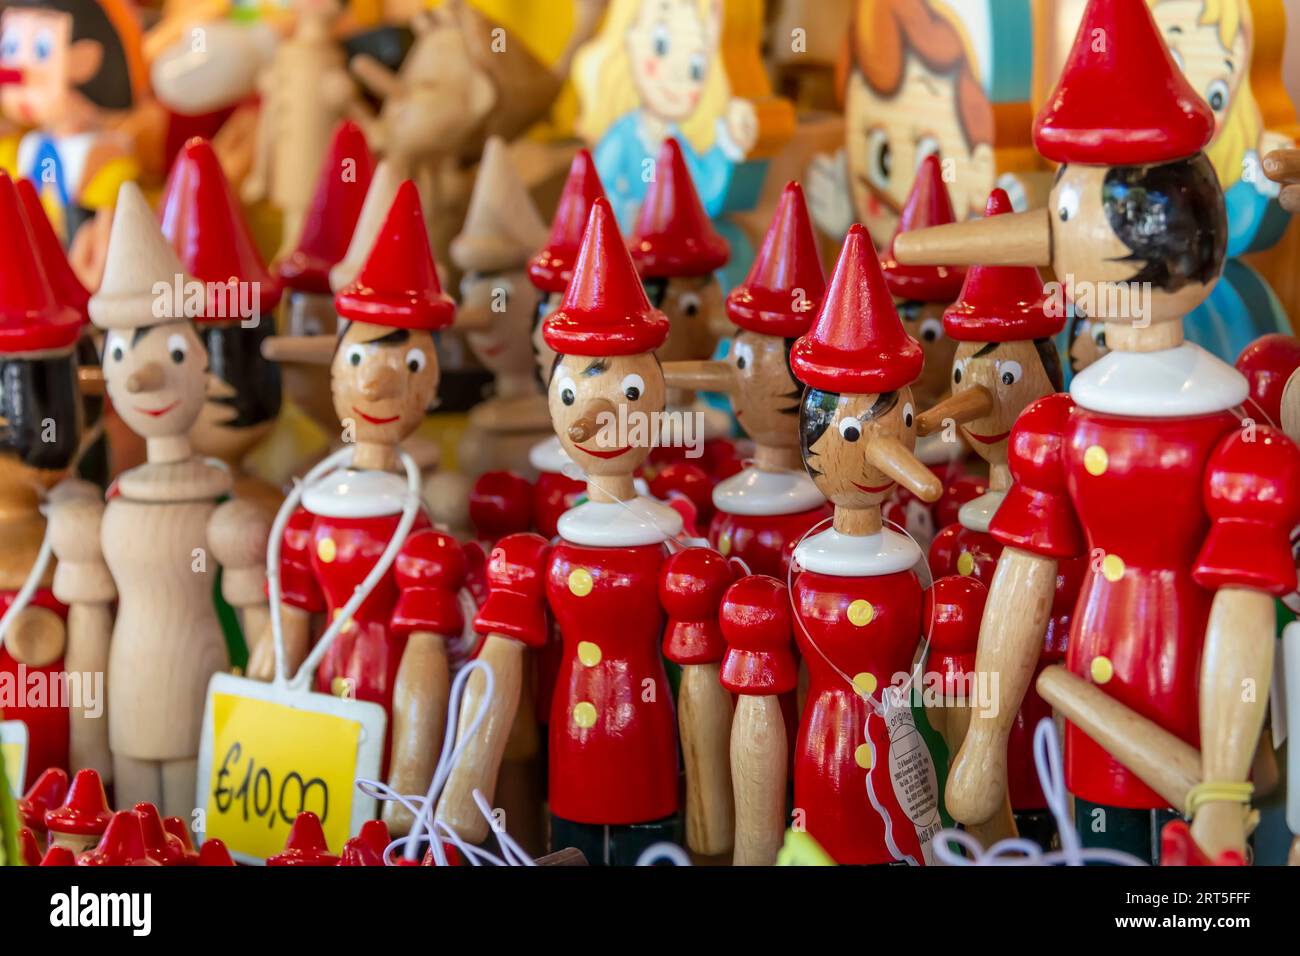 Wooden figurines depicting the character of Pinocchio in Collodi, Italy Stock Photo